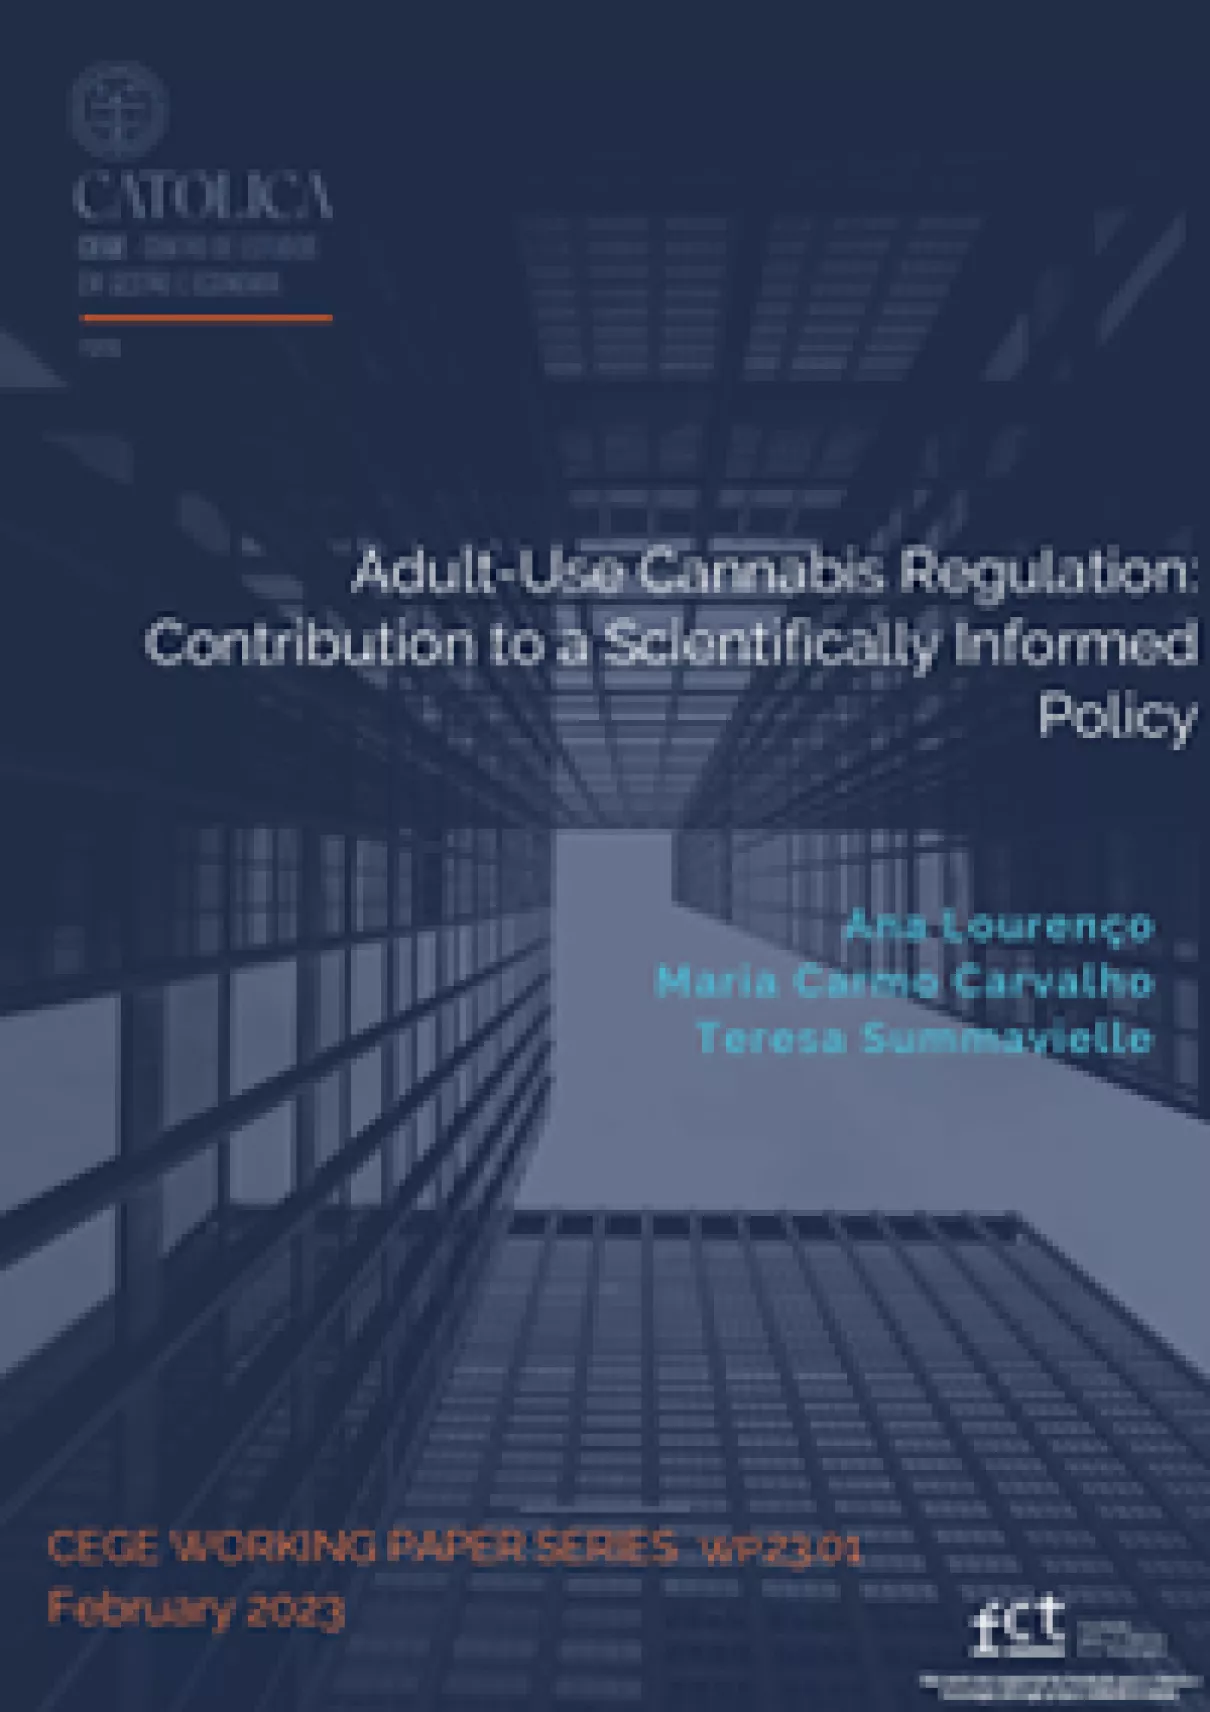 Adult-Use Cannabis Regulation: Contribution to a Scientifically Informed Policy